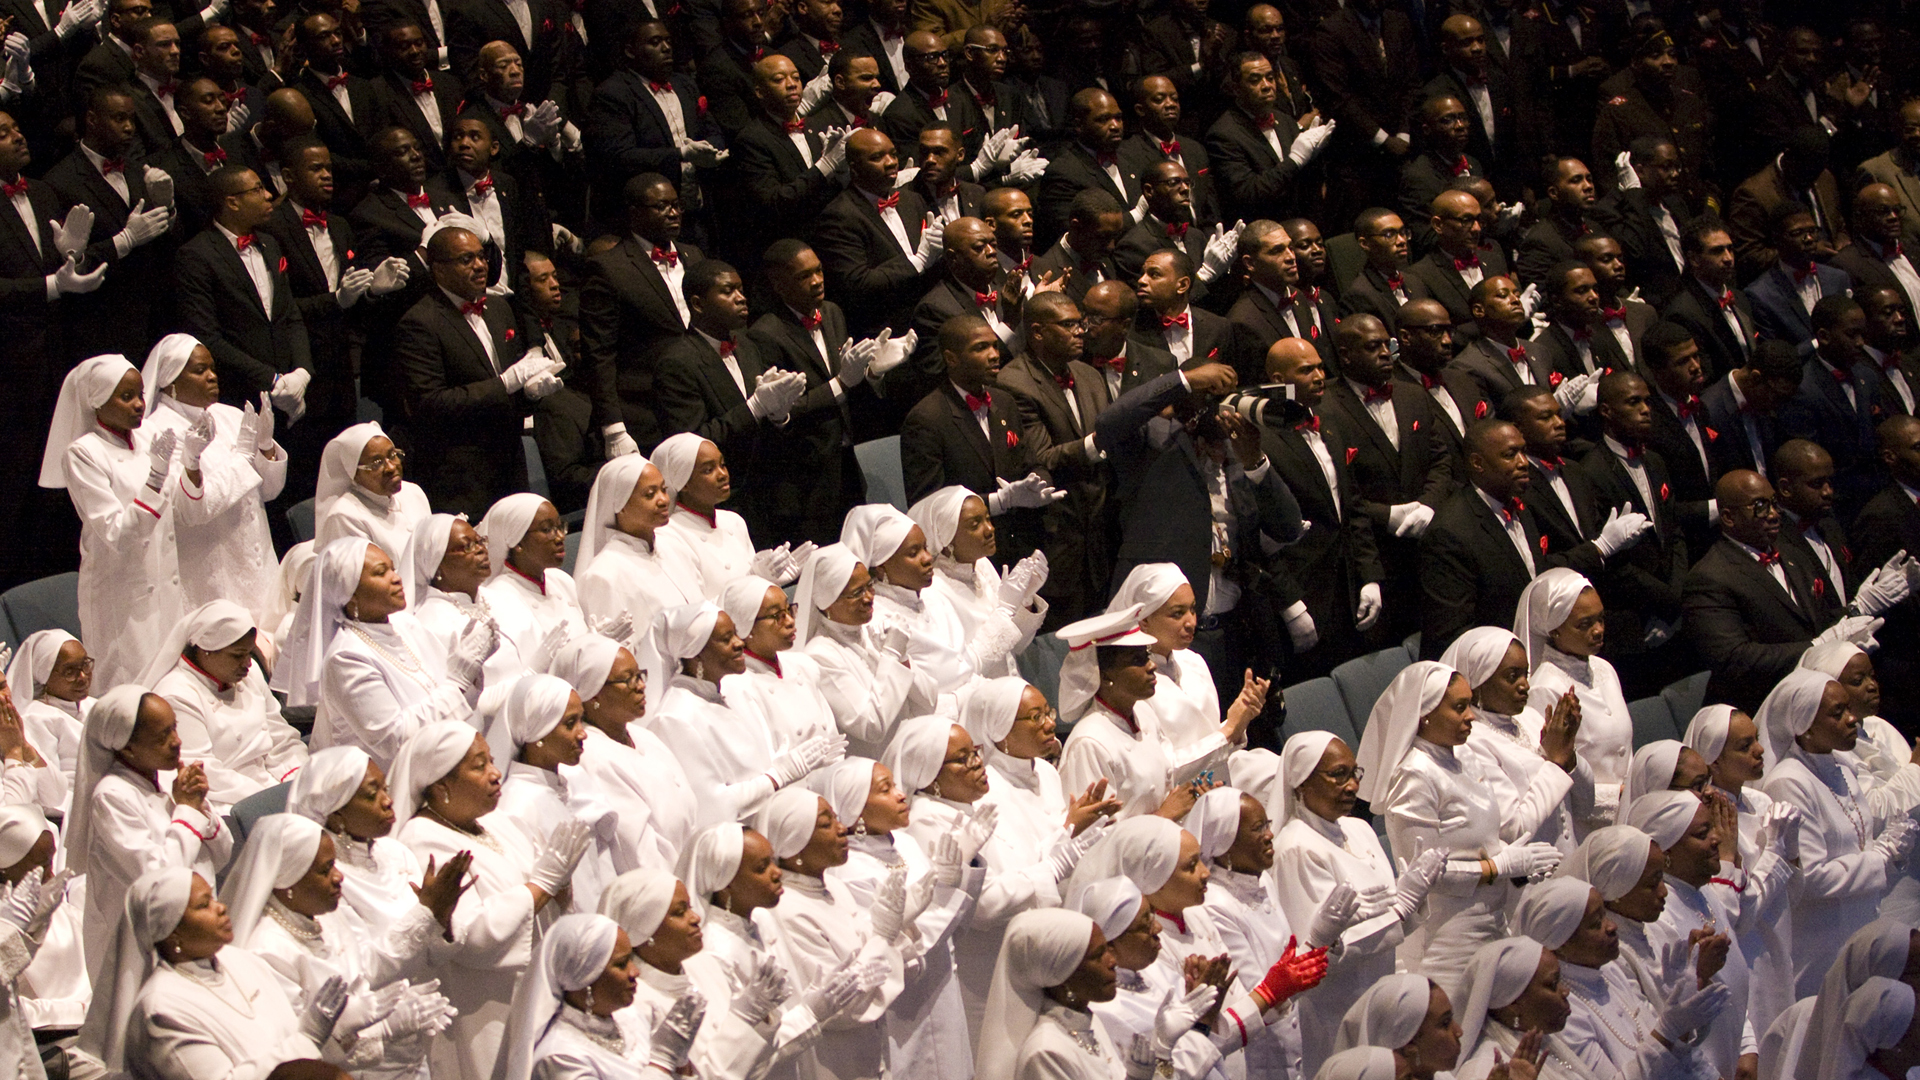 Minister Farrakhan: One Meal A Day Is Law In The Nation of Islam